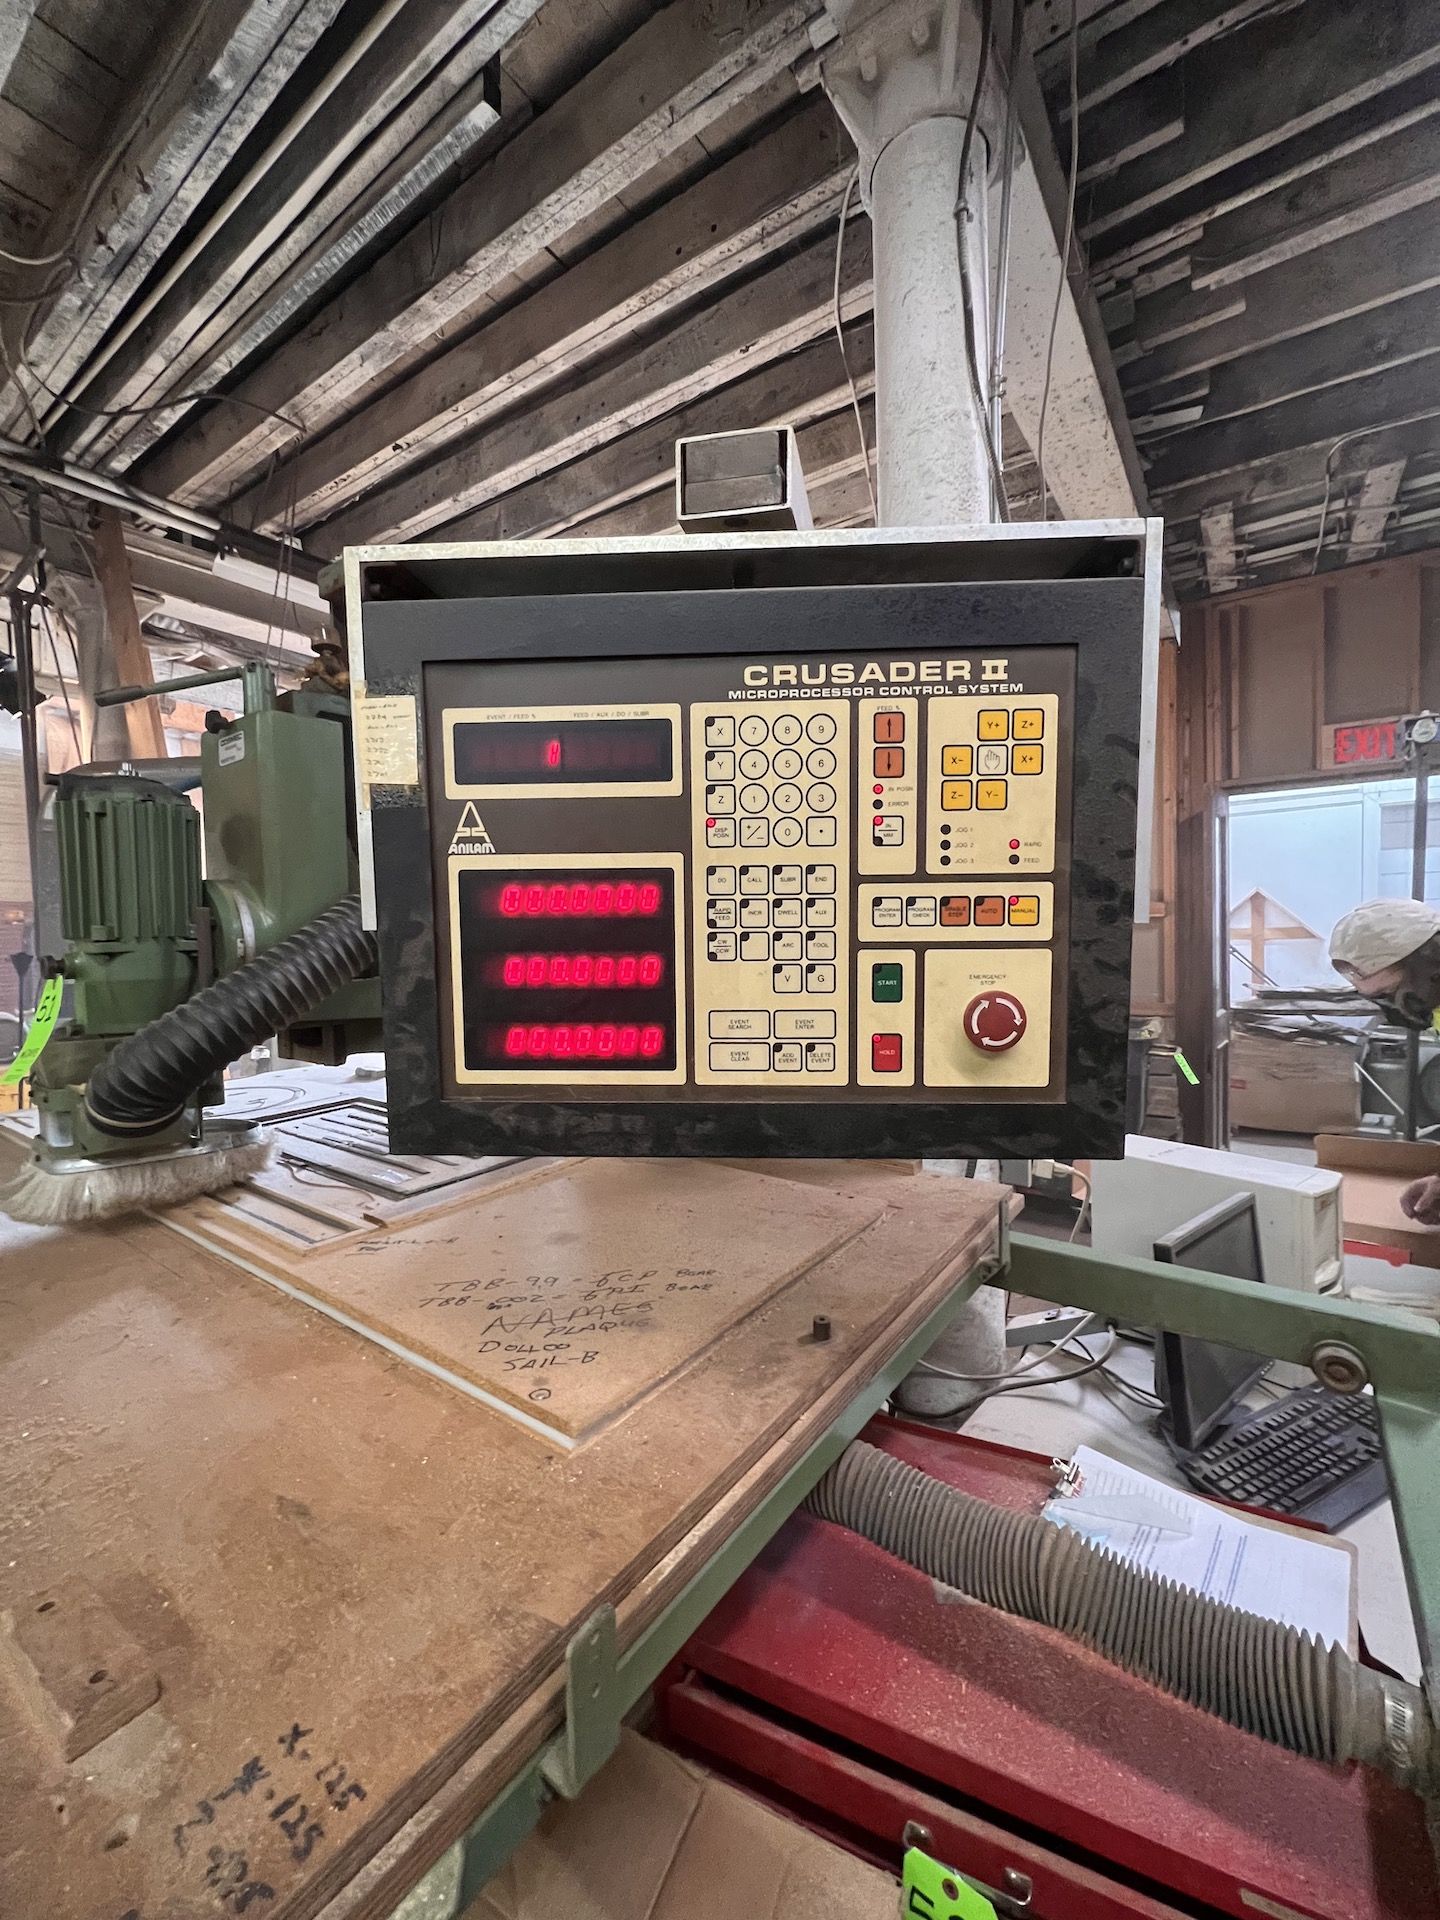 COSMEC CNC WITH CRUSADER 2 MICRO PROCESSOR CONTROL SYSTEM - Image 6 of 28